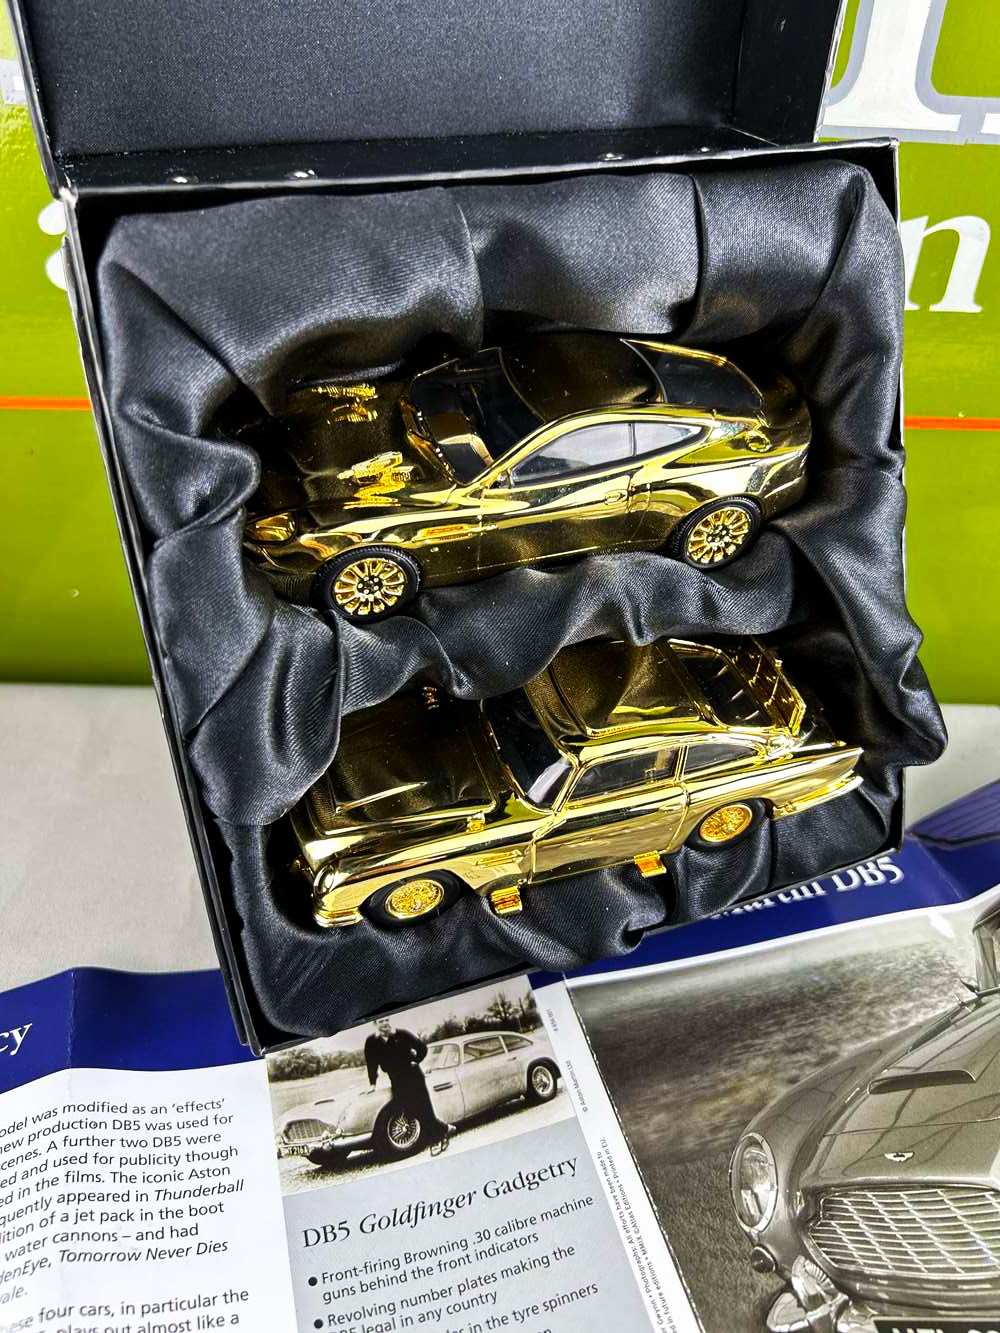 James Bond 007 Special Edition 40th Anniversary Gold Aston Martin`s - Image 2 of 7